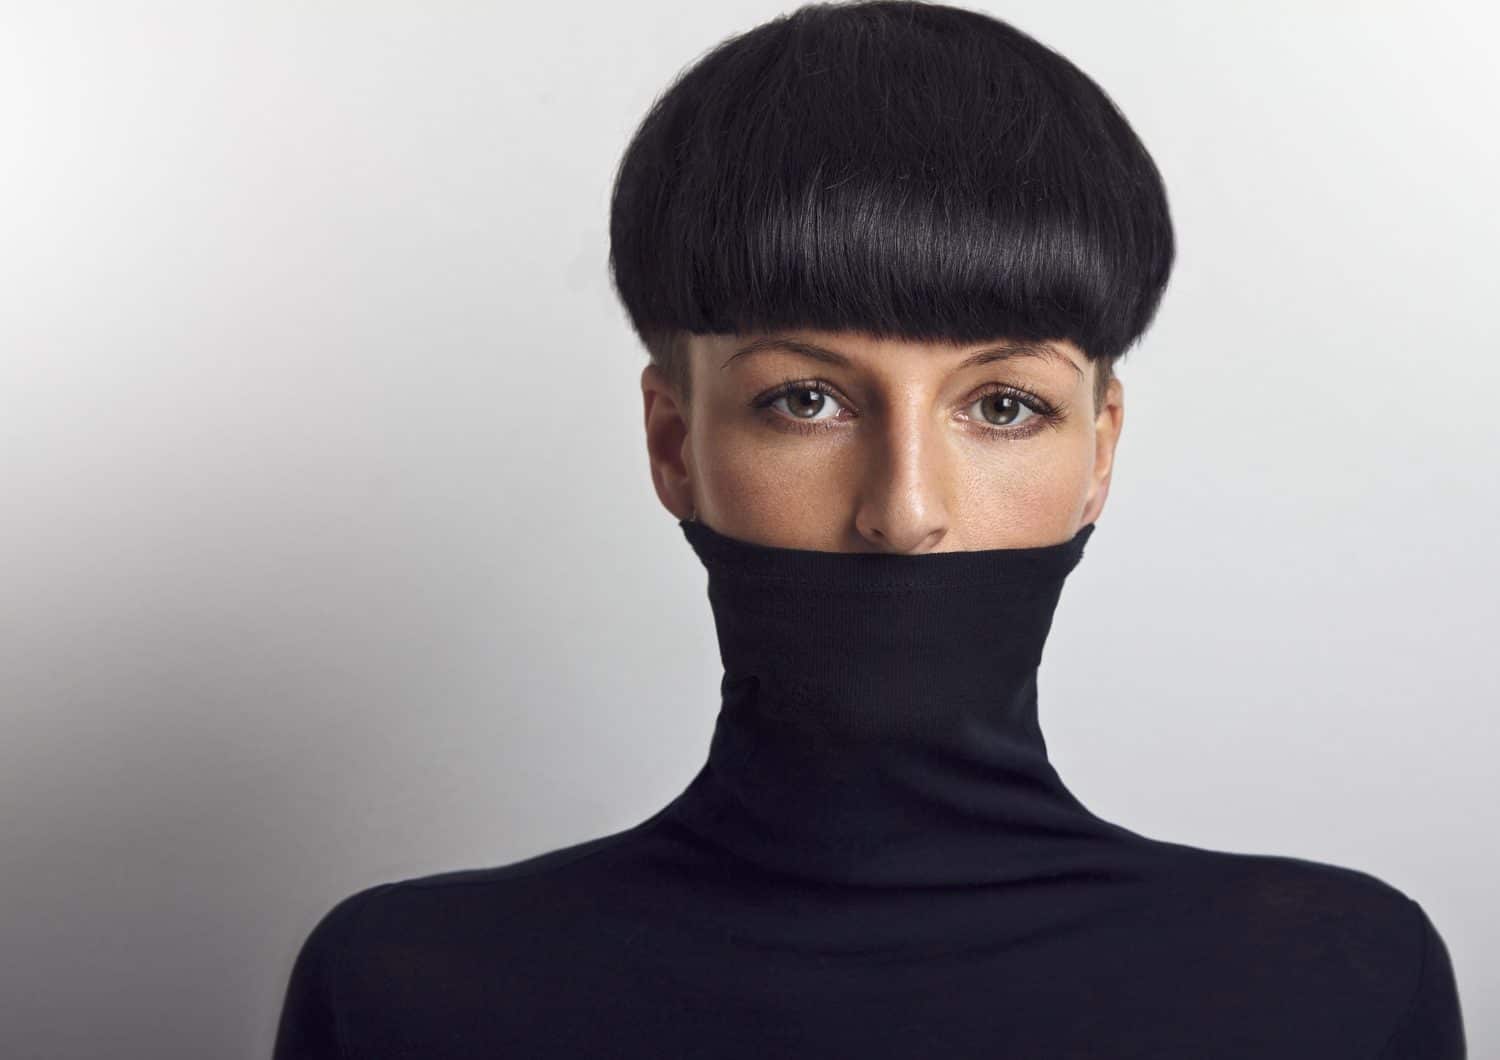 Beautiful woman with black mushroom hair cut covering her face with black turtleneck looking at the camera.